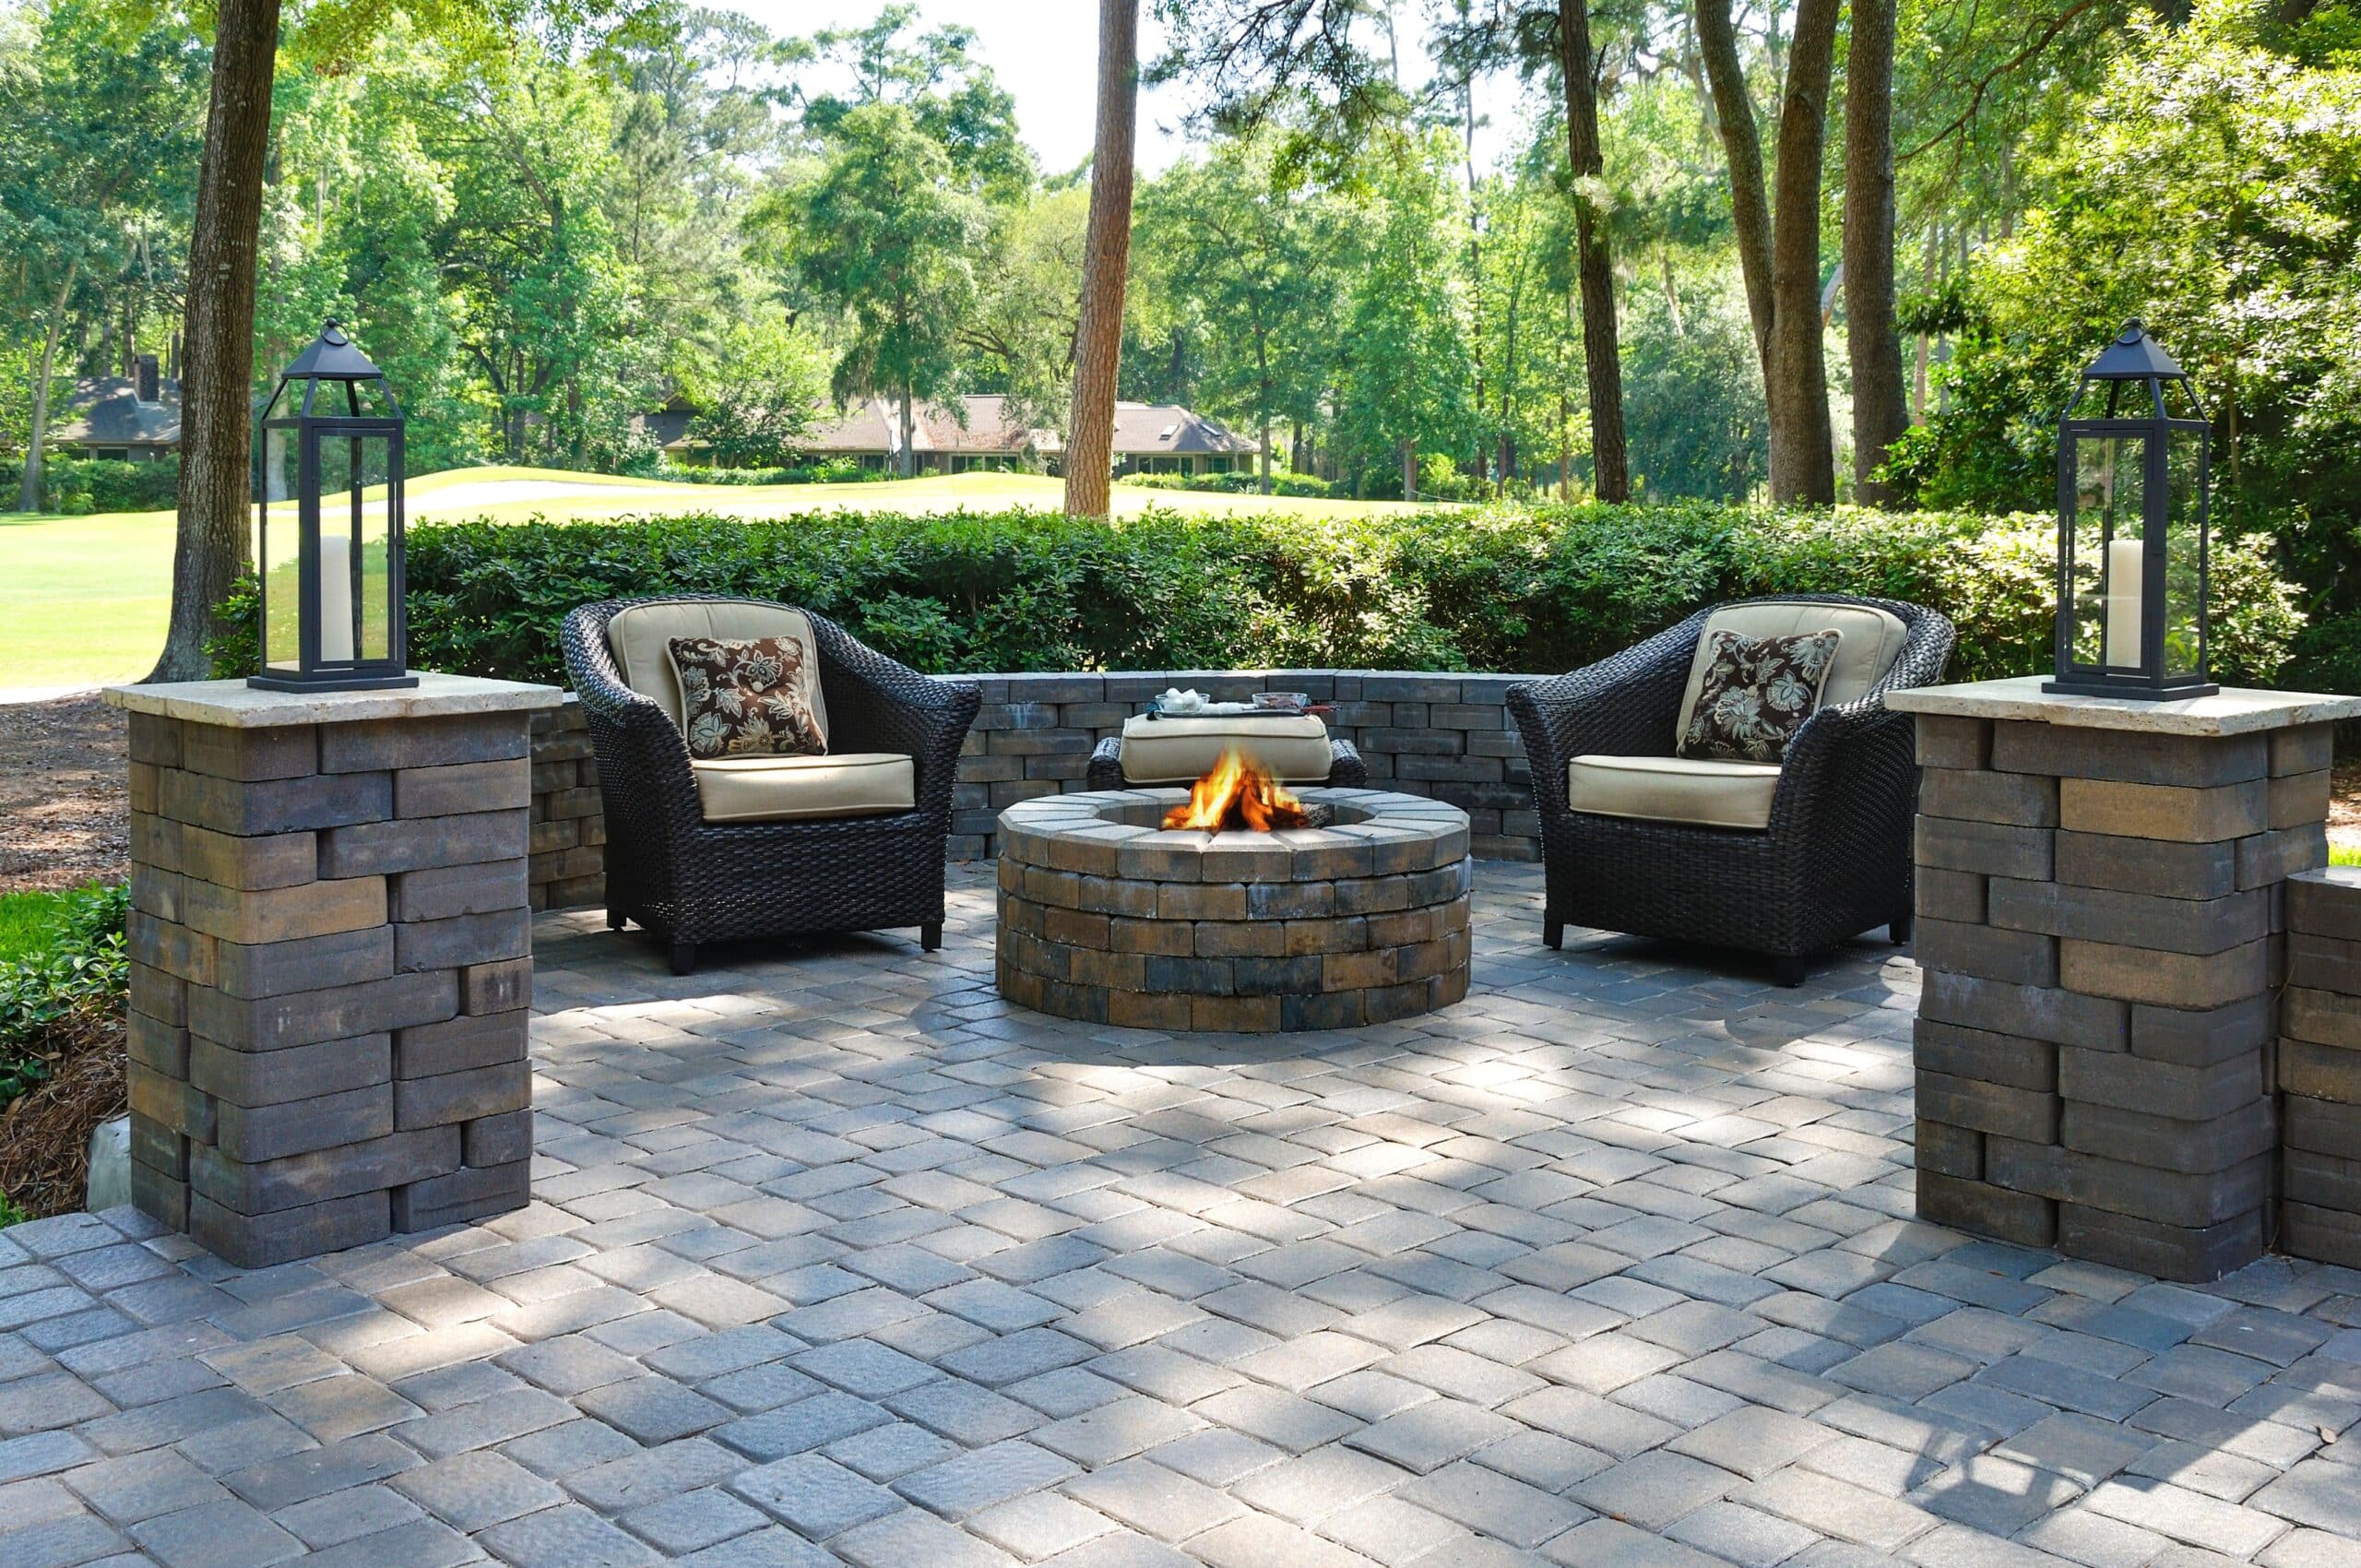 brick paver patio with brick pillars with outdoor lighting fixtures and brick fireplace in DuPage County, Naperville Illinois. Hardscaping done by bret-mar landscaping